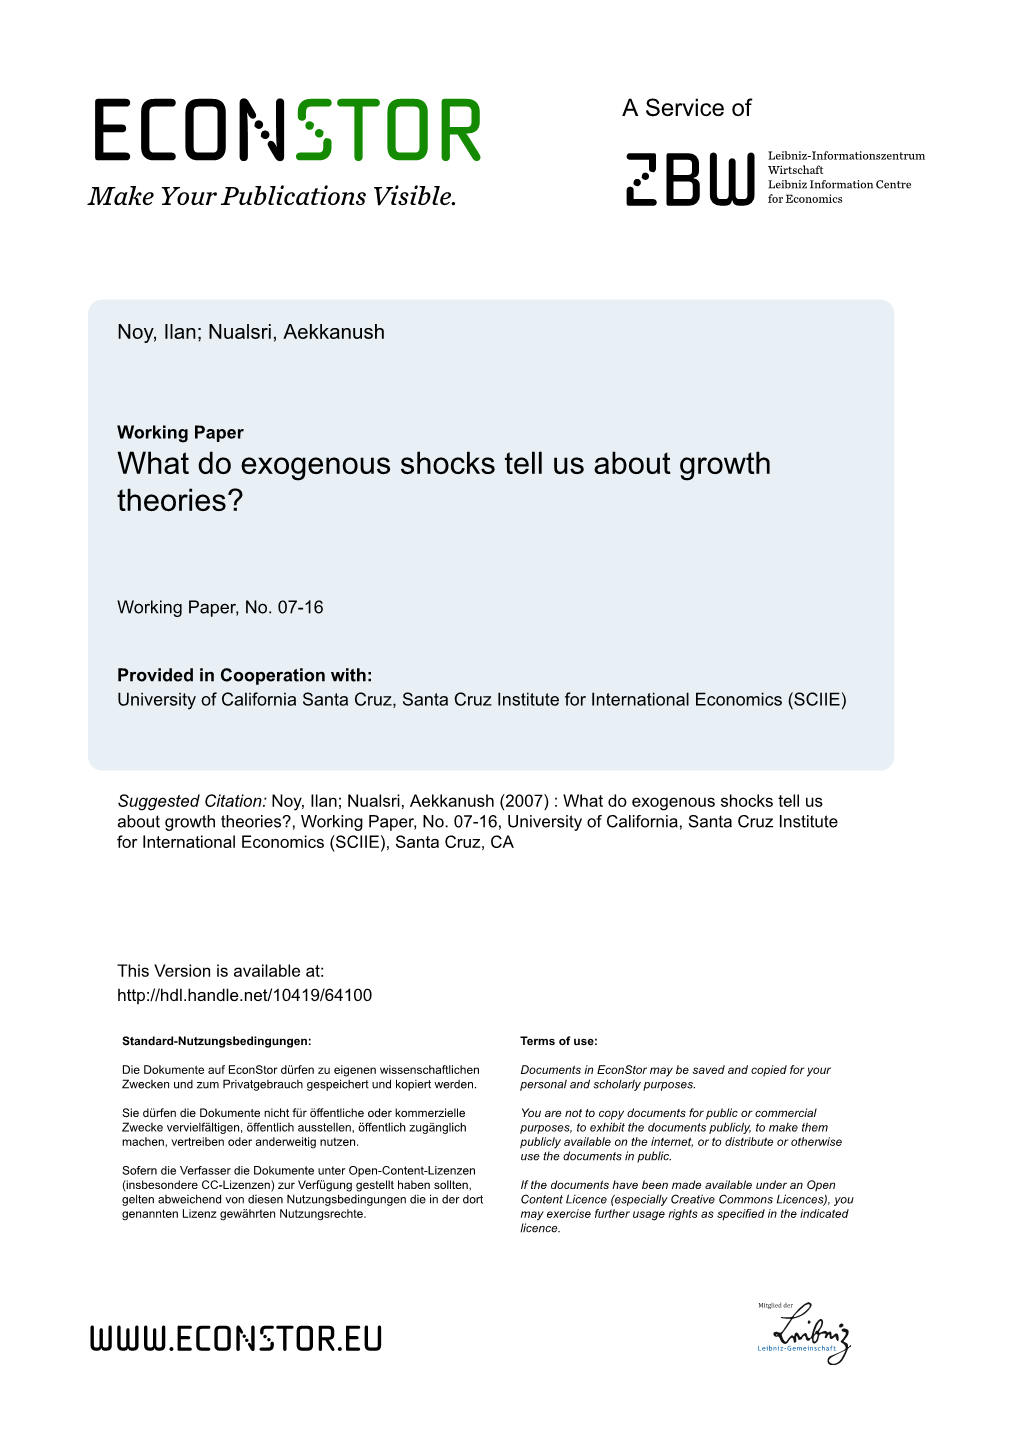 What Do Exogenous Shocks Tell Us About Growth Theories?